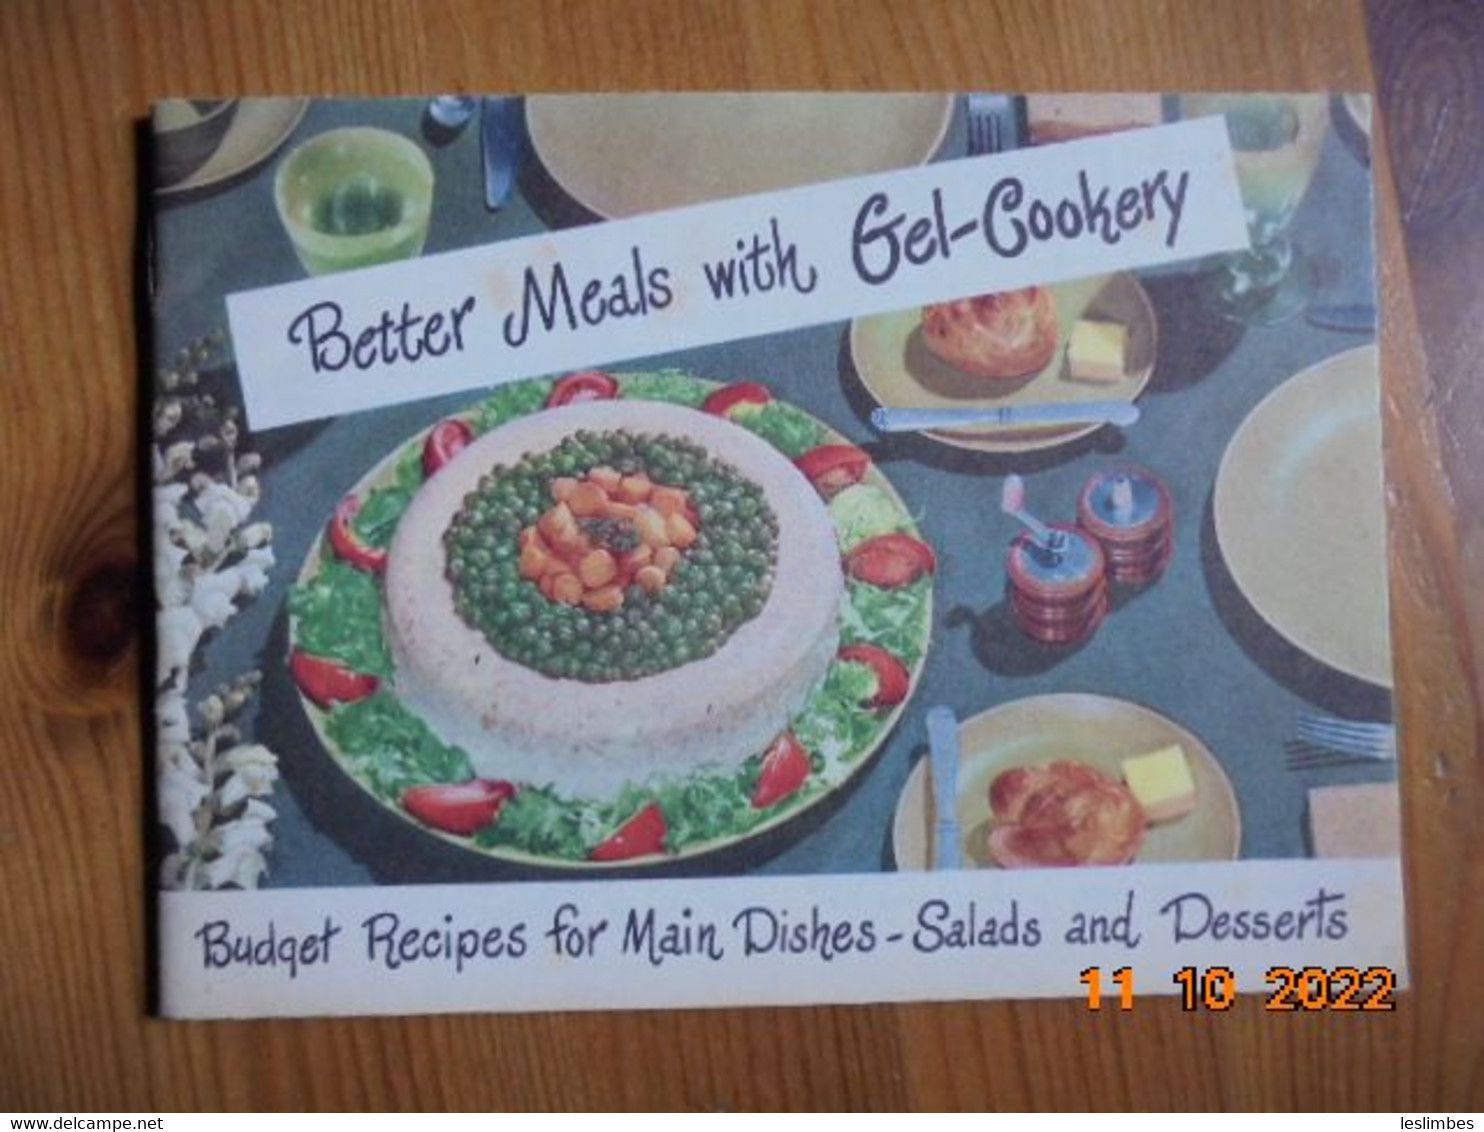 Better Meals With Gel Cookery : Budget Recipes For Main Dishes, Salads And Desserts. Charles B. Knox Gelatine Co. 1952 - Américaine